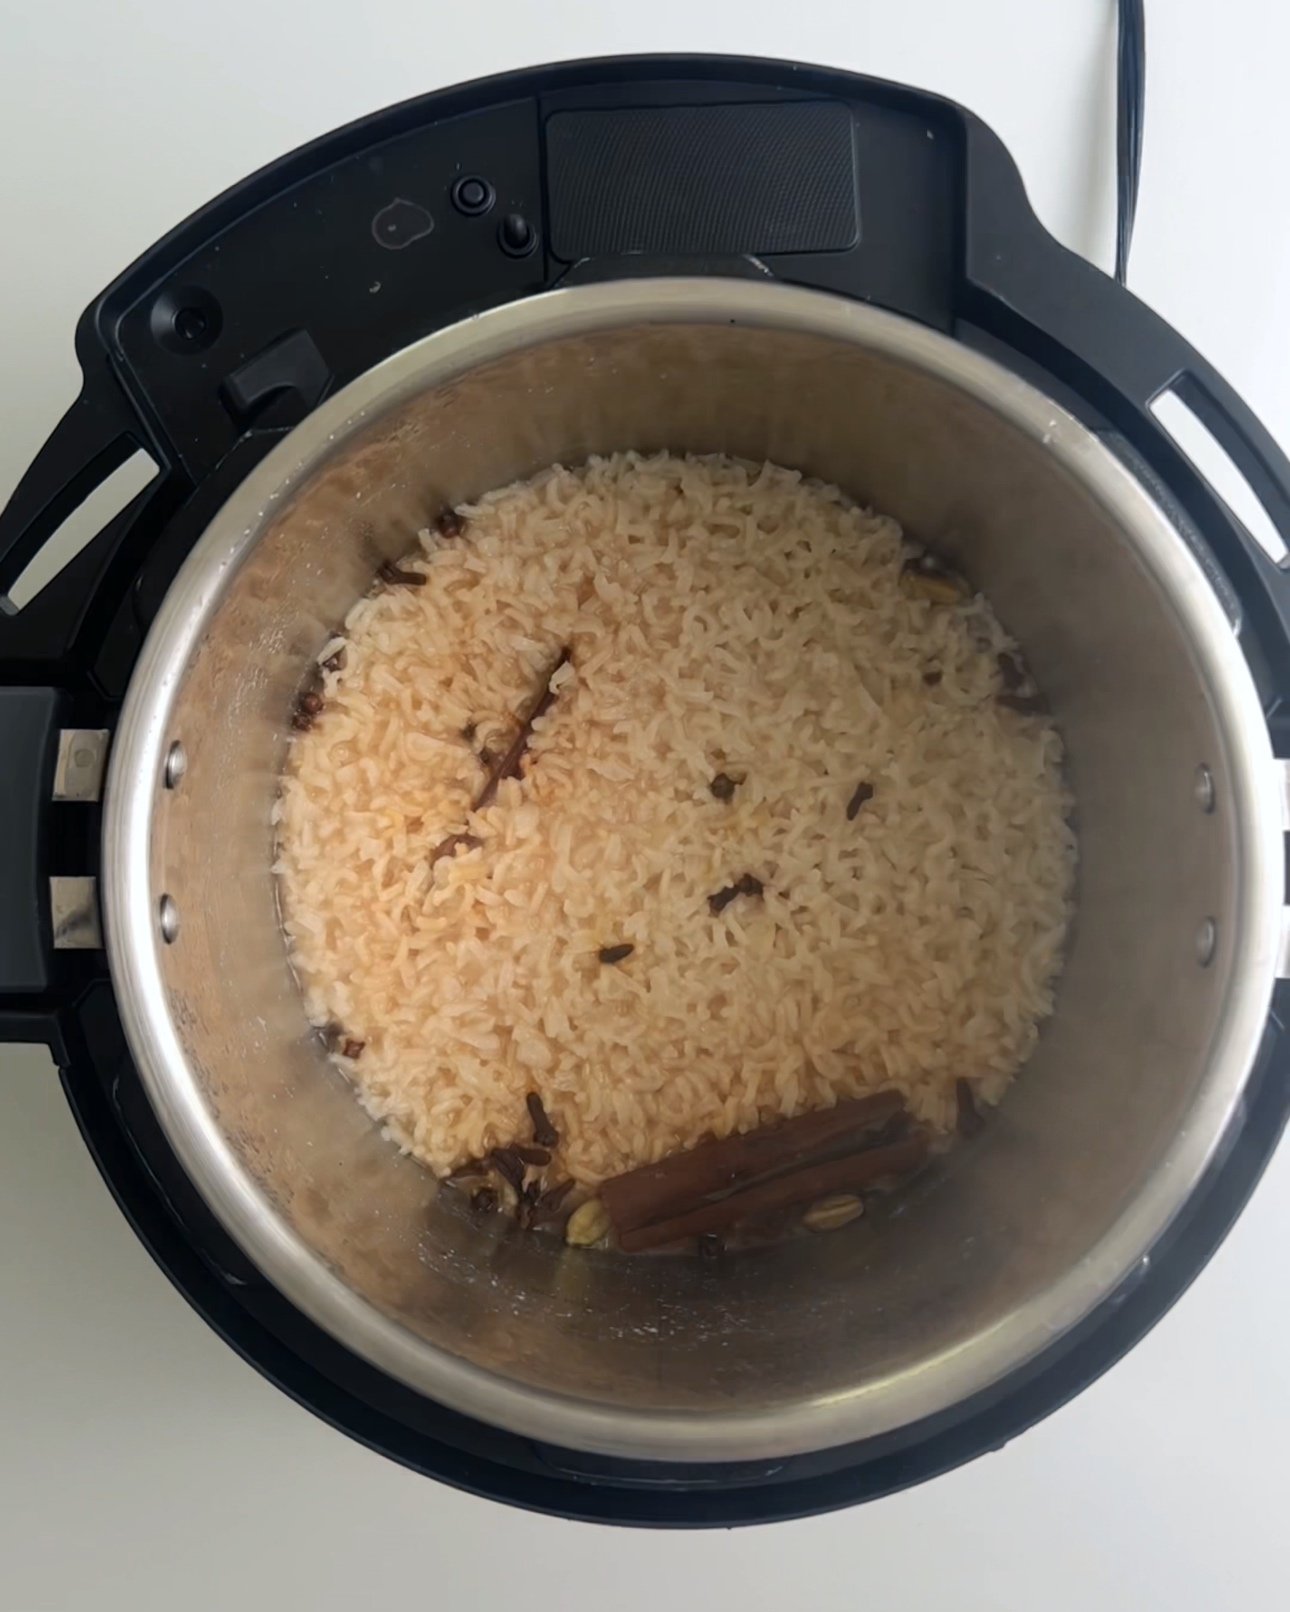 Cooked rice in the instant pot